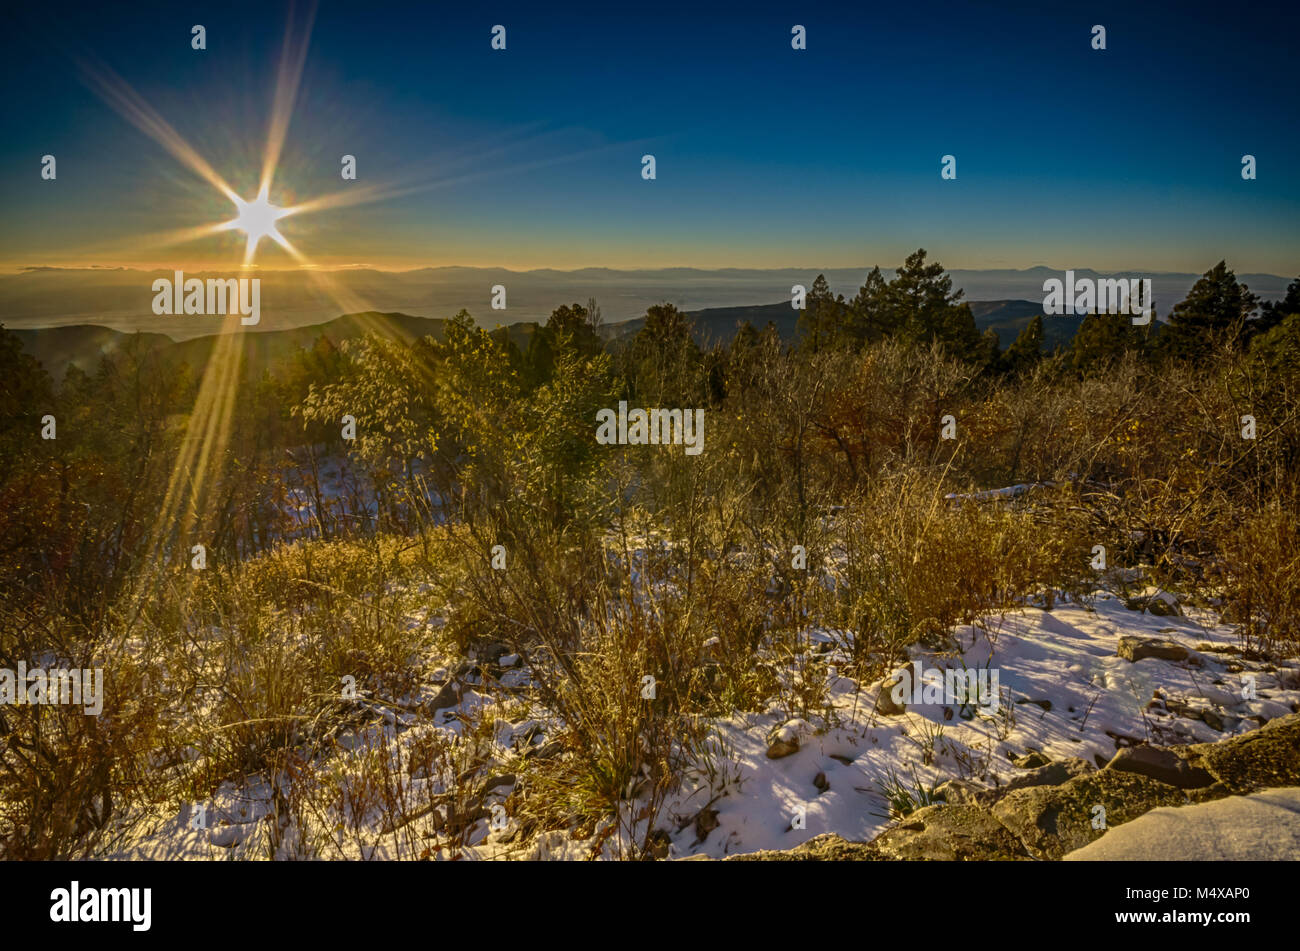 A solar starburst over a mountain snow landscape at Sunspot Astronomy Visitor Center near Cloudcroft, NM. Stock Photo